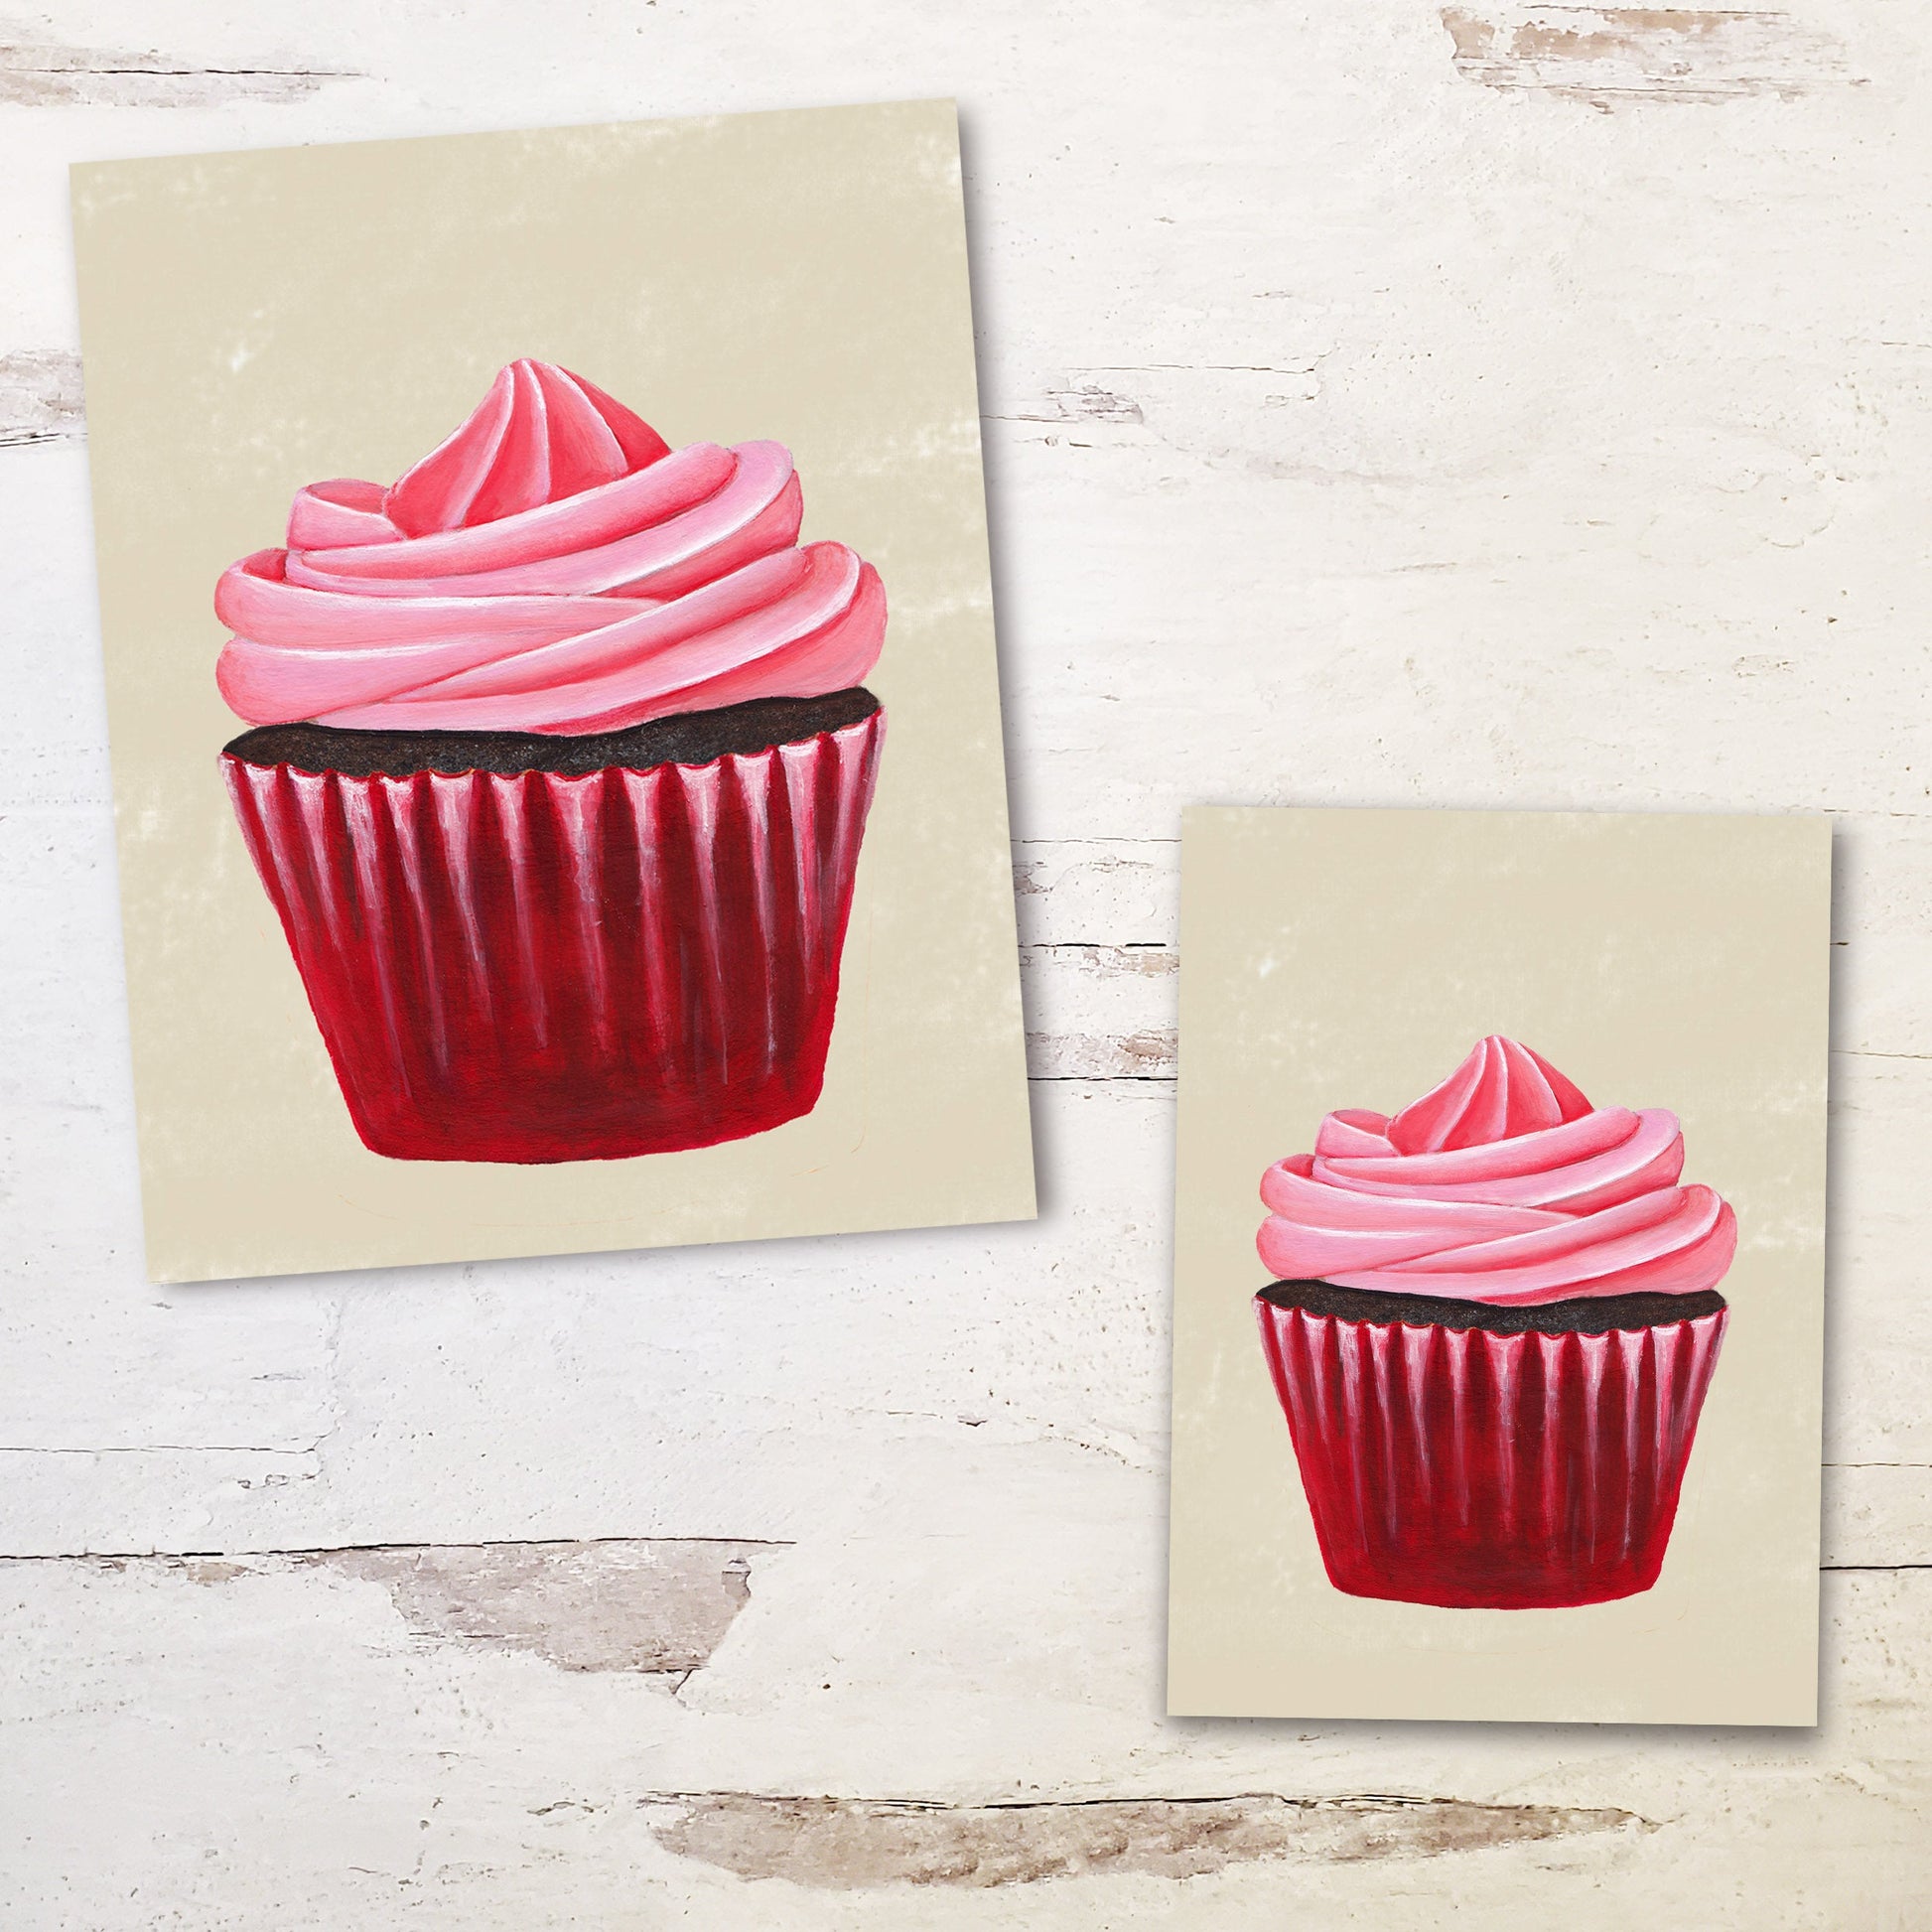 pink swirl cupcake print is available in sizes 5 by 7 and 8 by 10